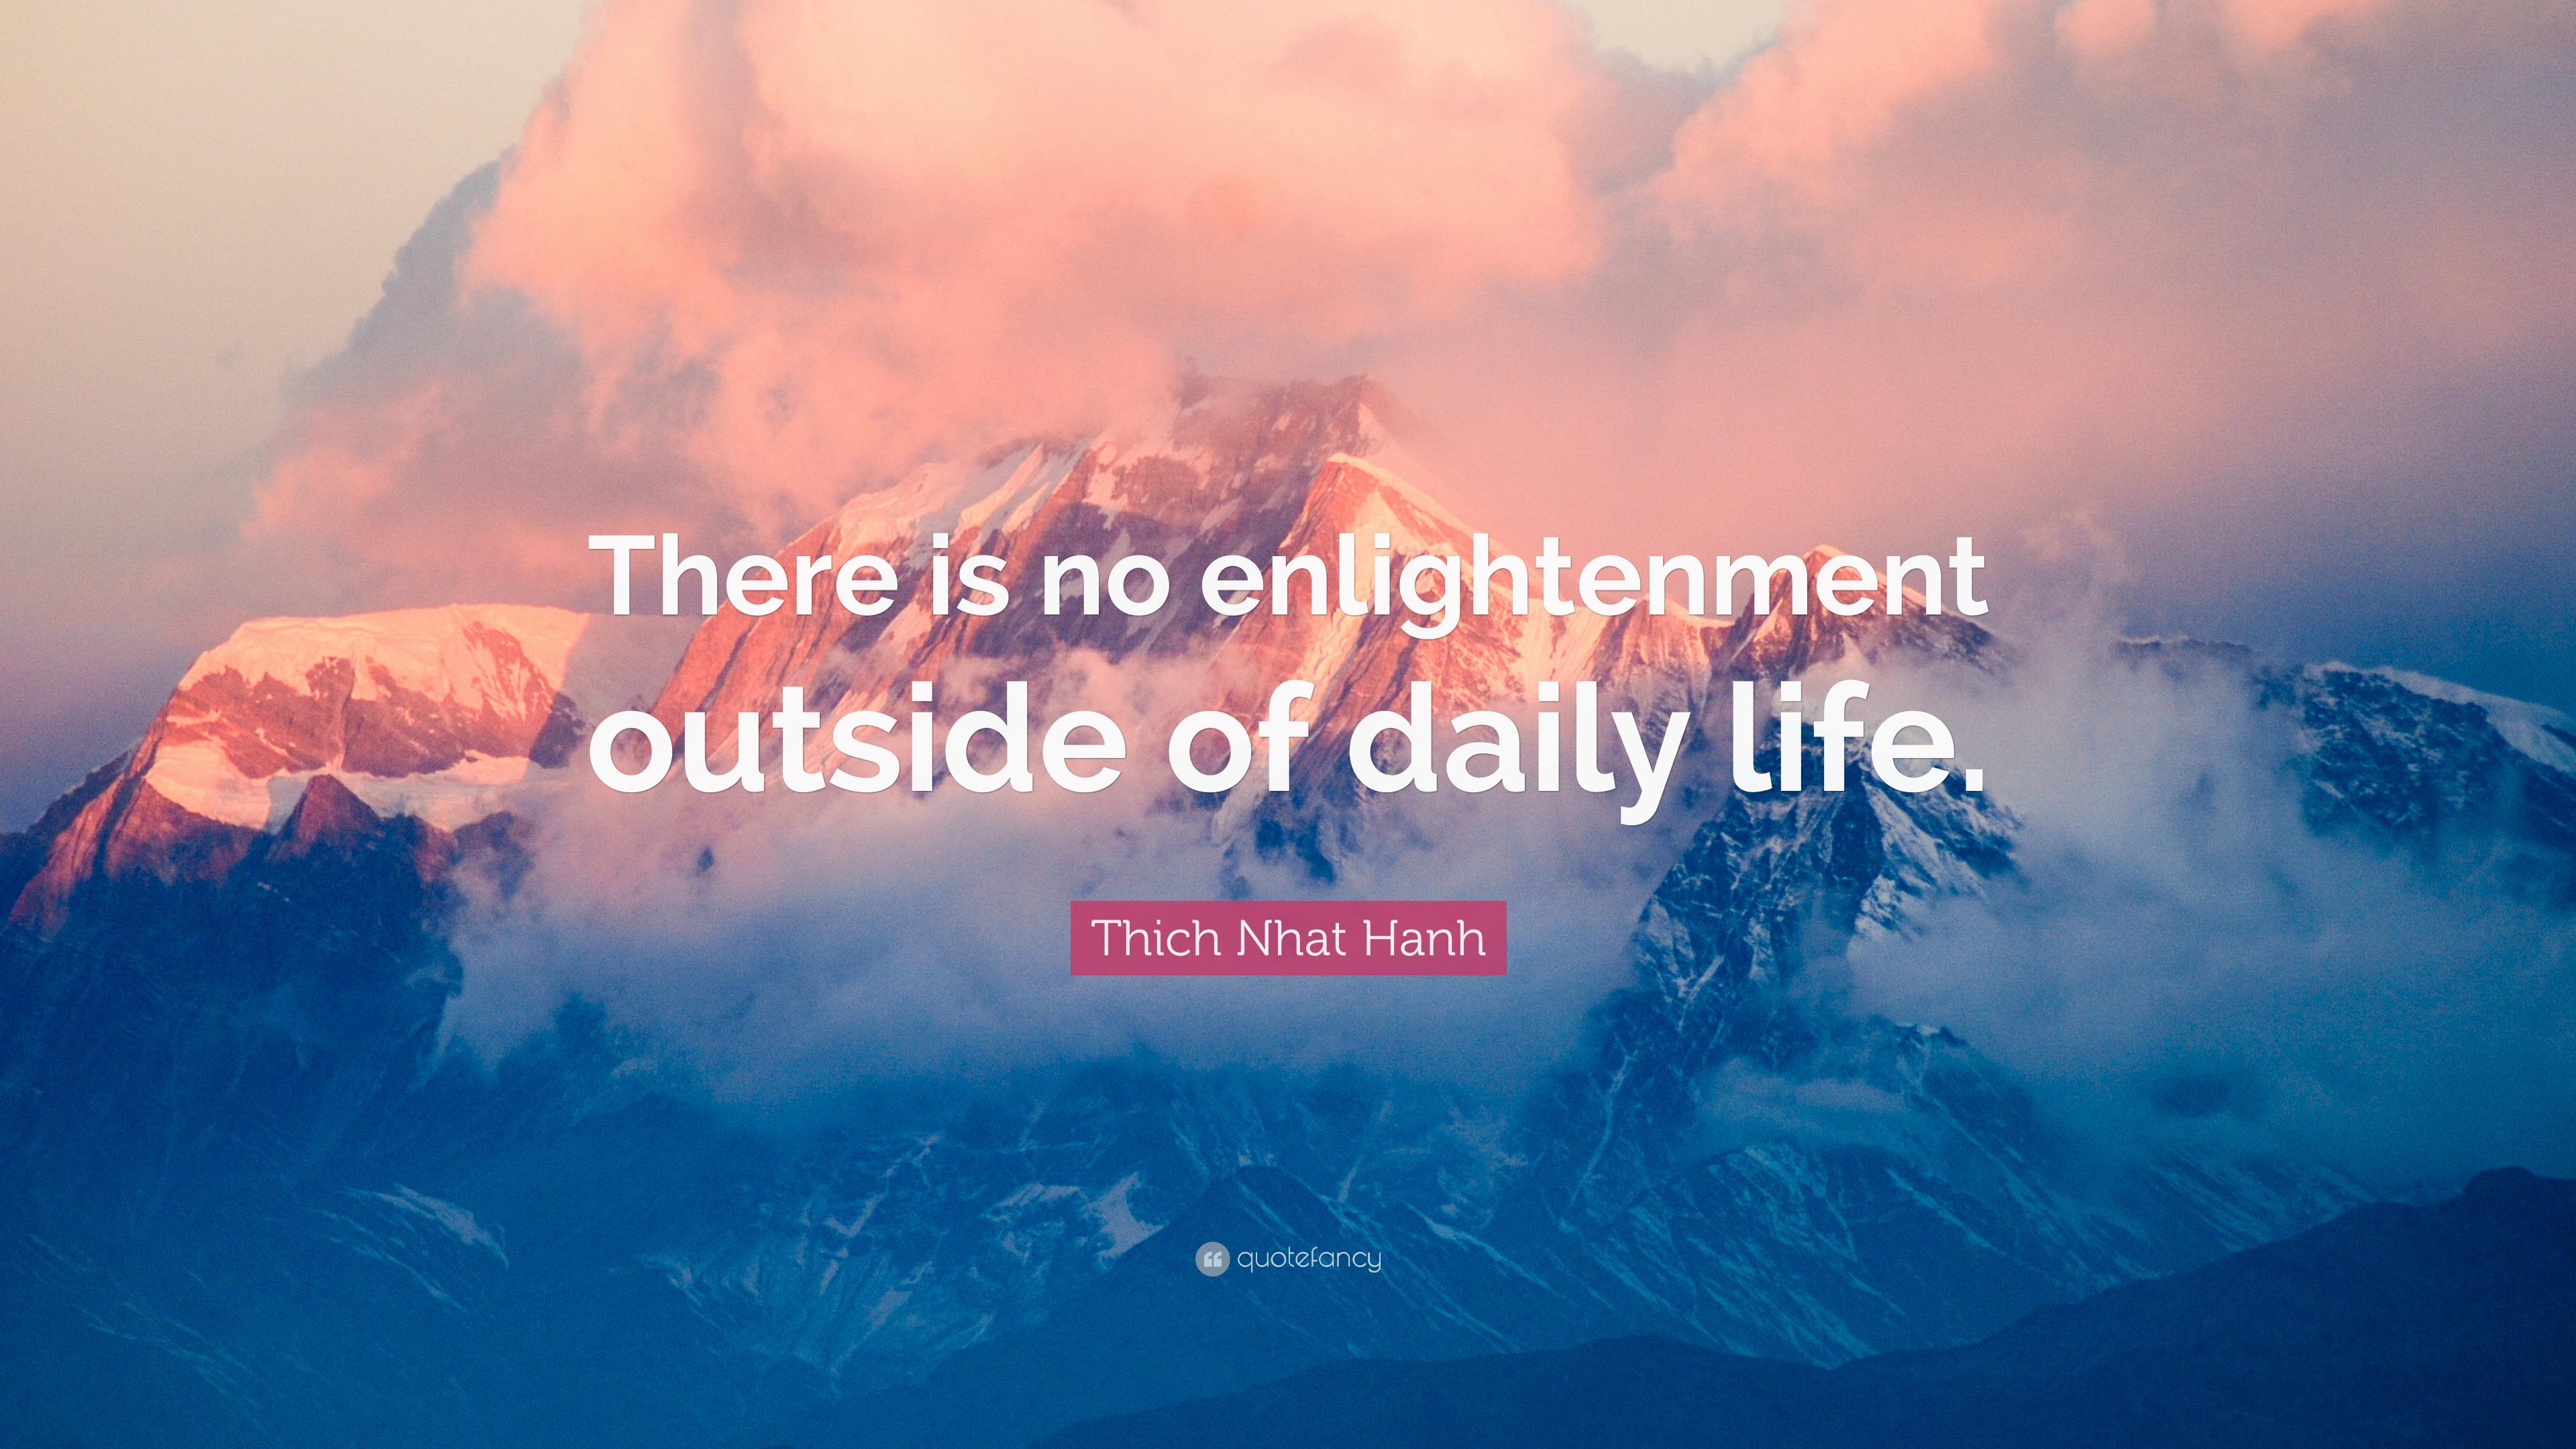 Thich Nhat Hanh Quote: “There is no enlightenment outside